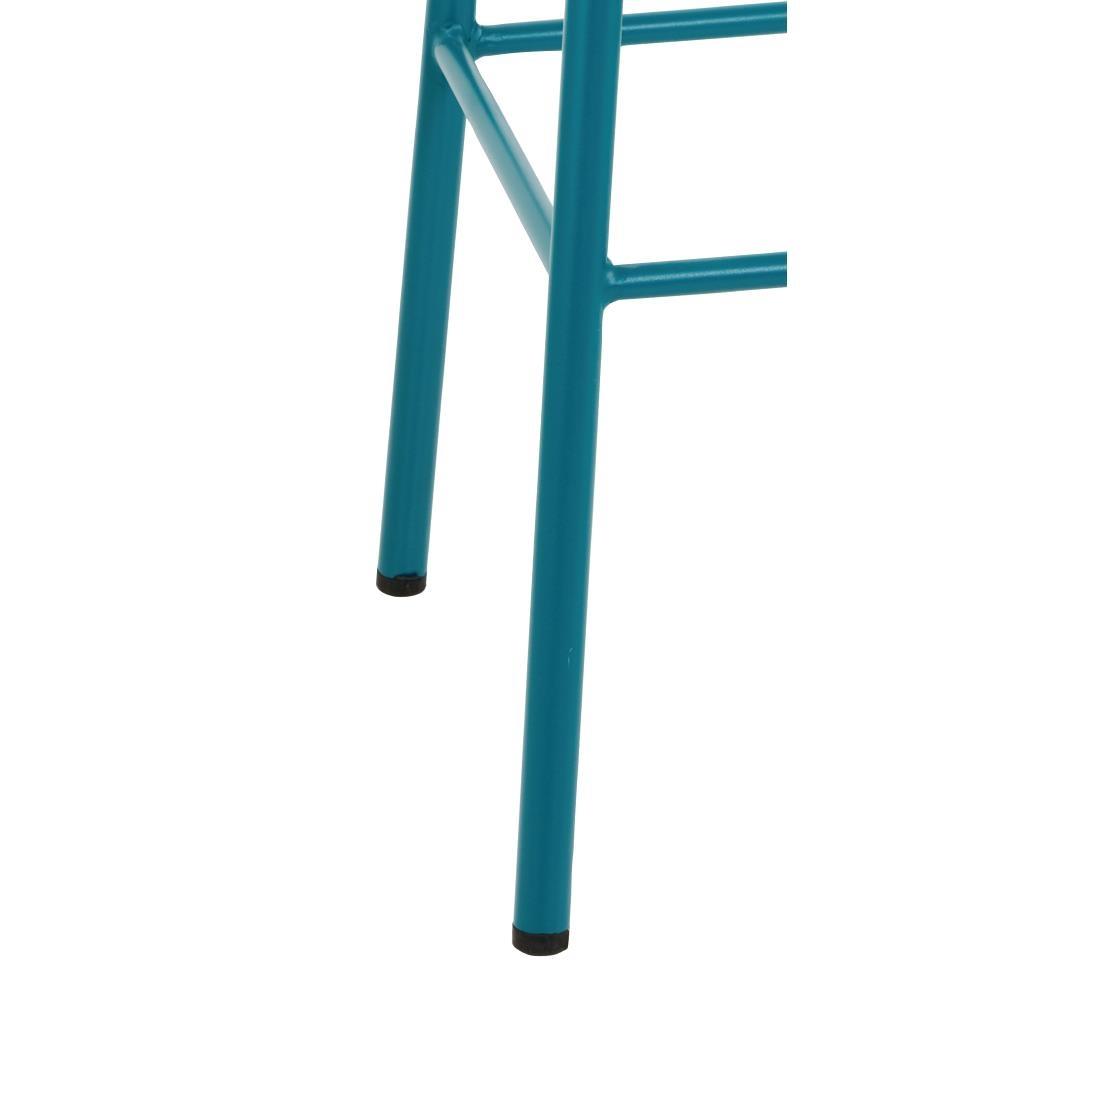 Bolero Cantina High Stools with Wooden Seat Pad Teal (Pack of 4) - FB938  - 3